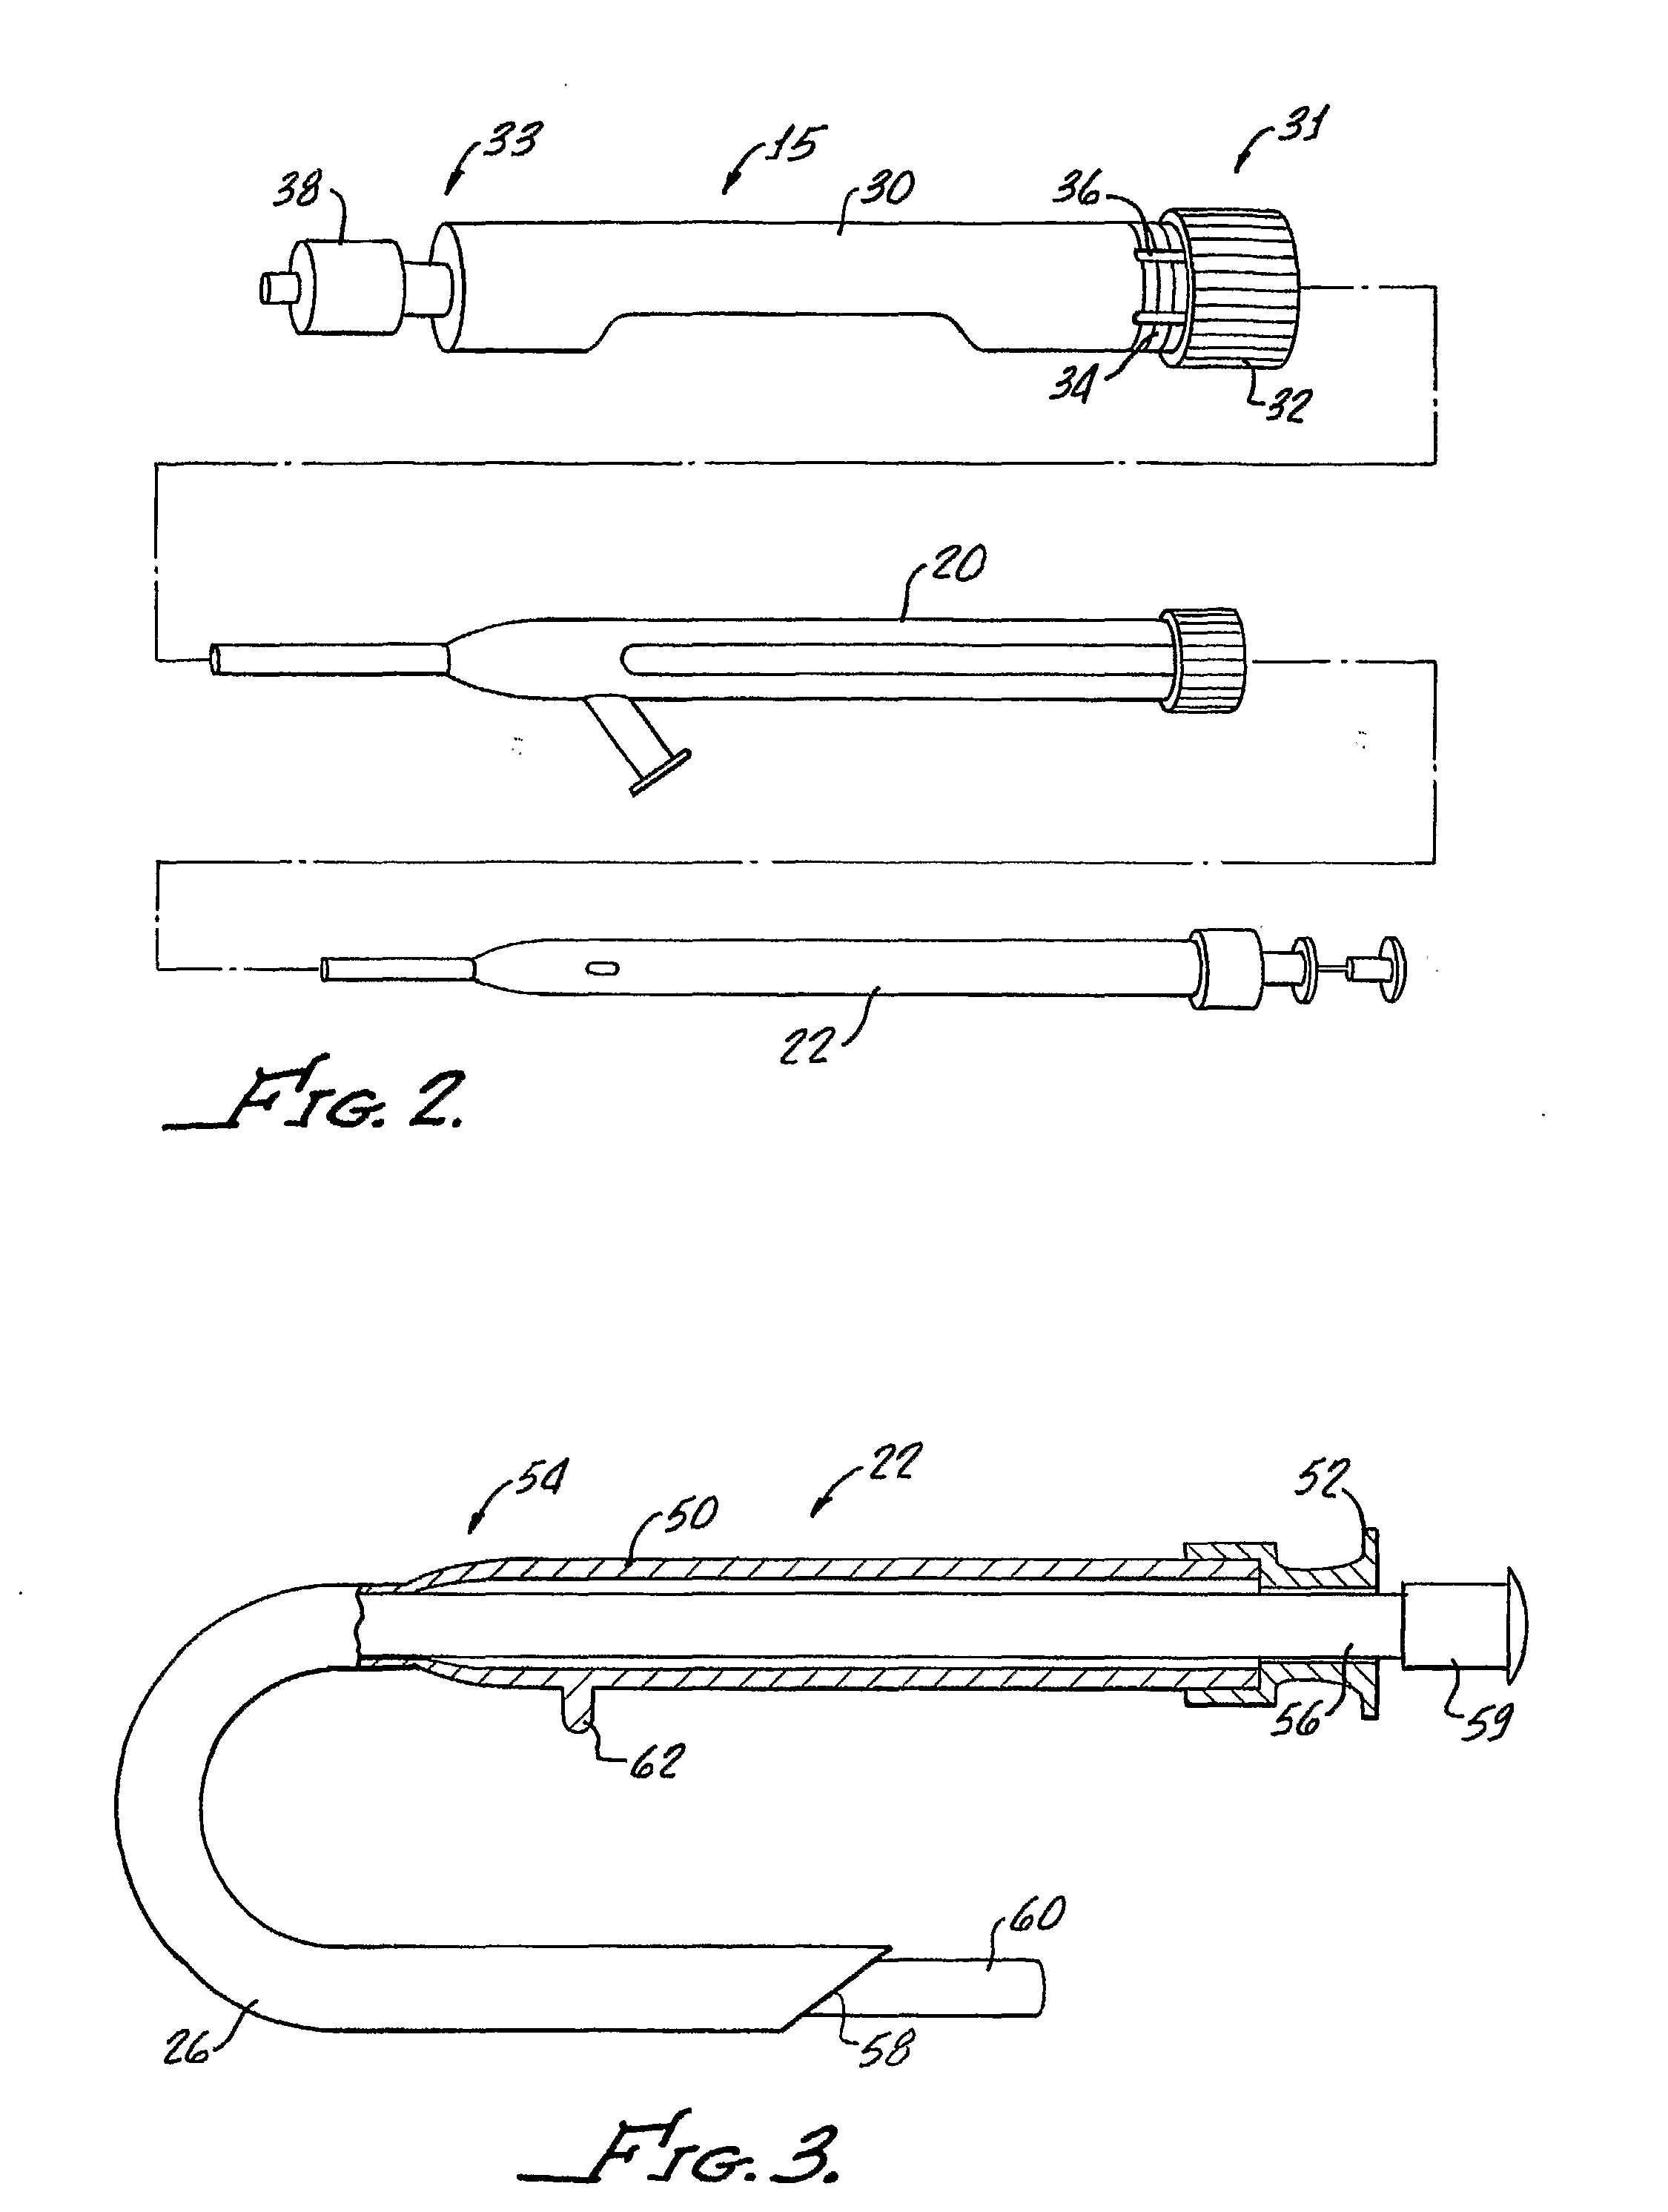 Method and Apparatus for Performing Needle Guided Interventions